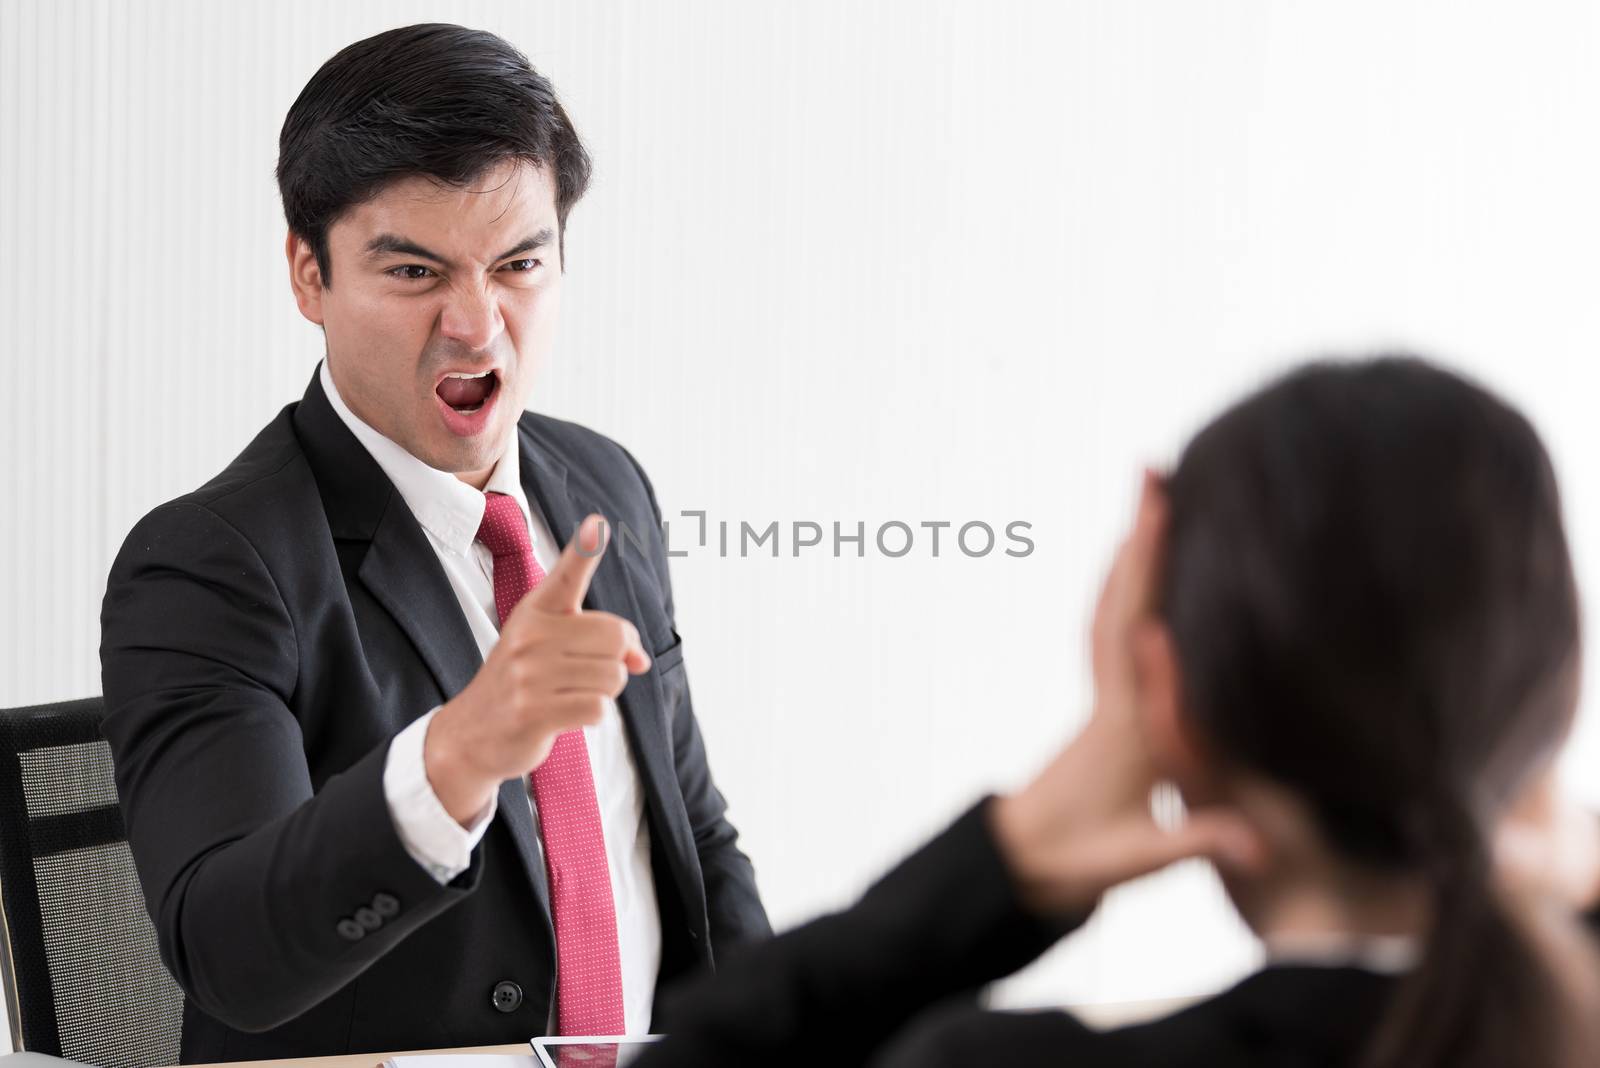 The manager has upset to employee woman with anger and unhappine by animagesdesign